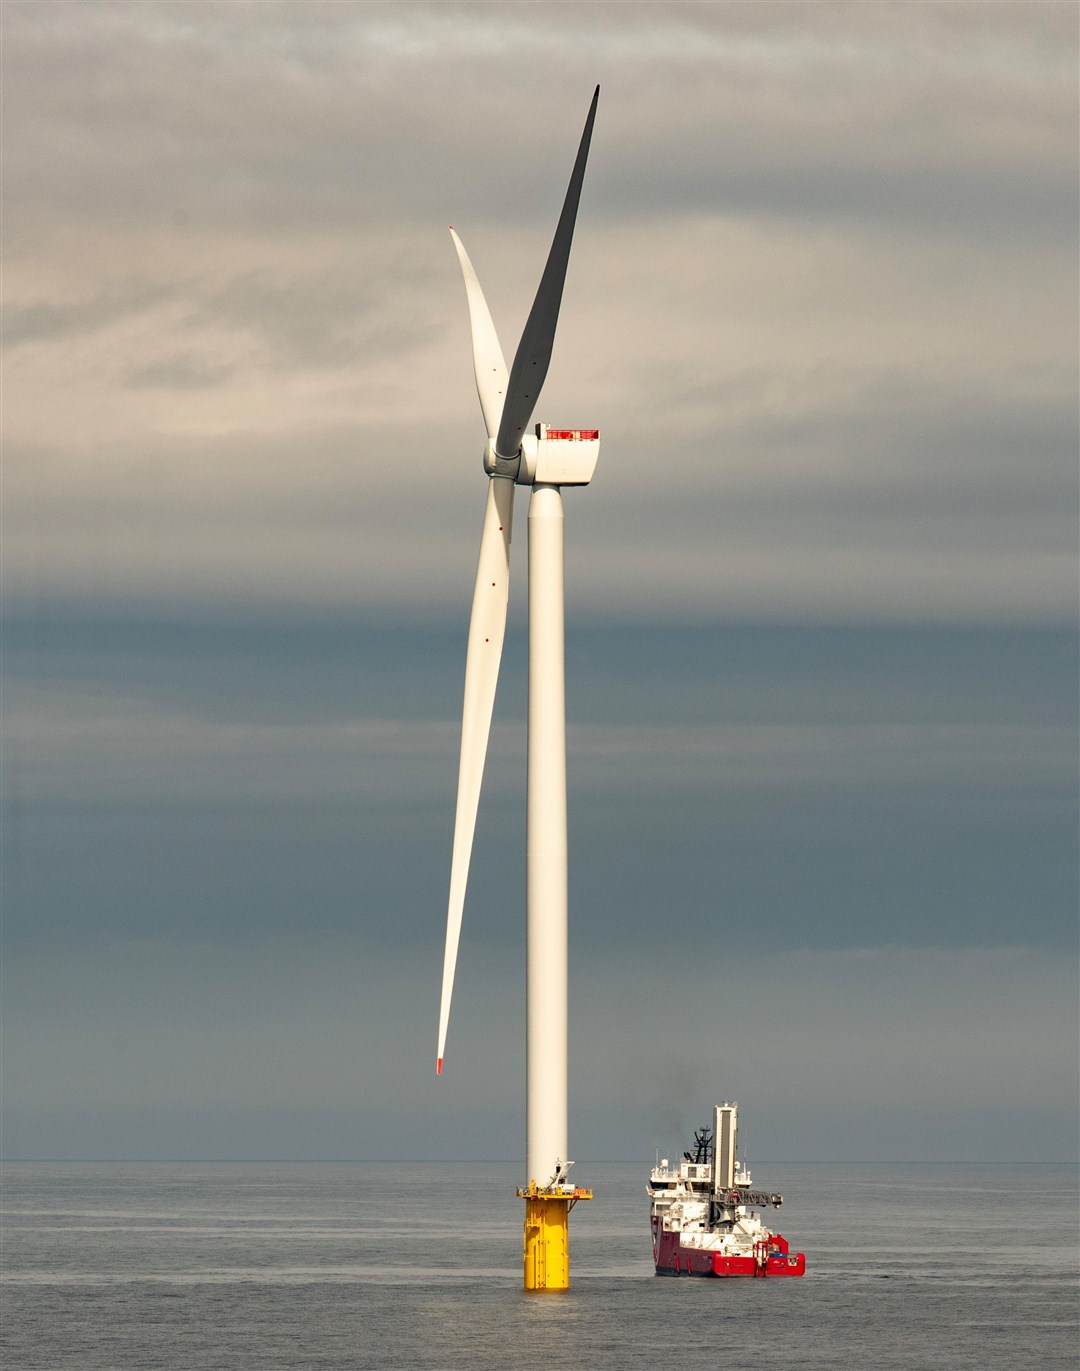 The image shows the scale of the turbines.